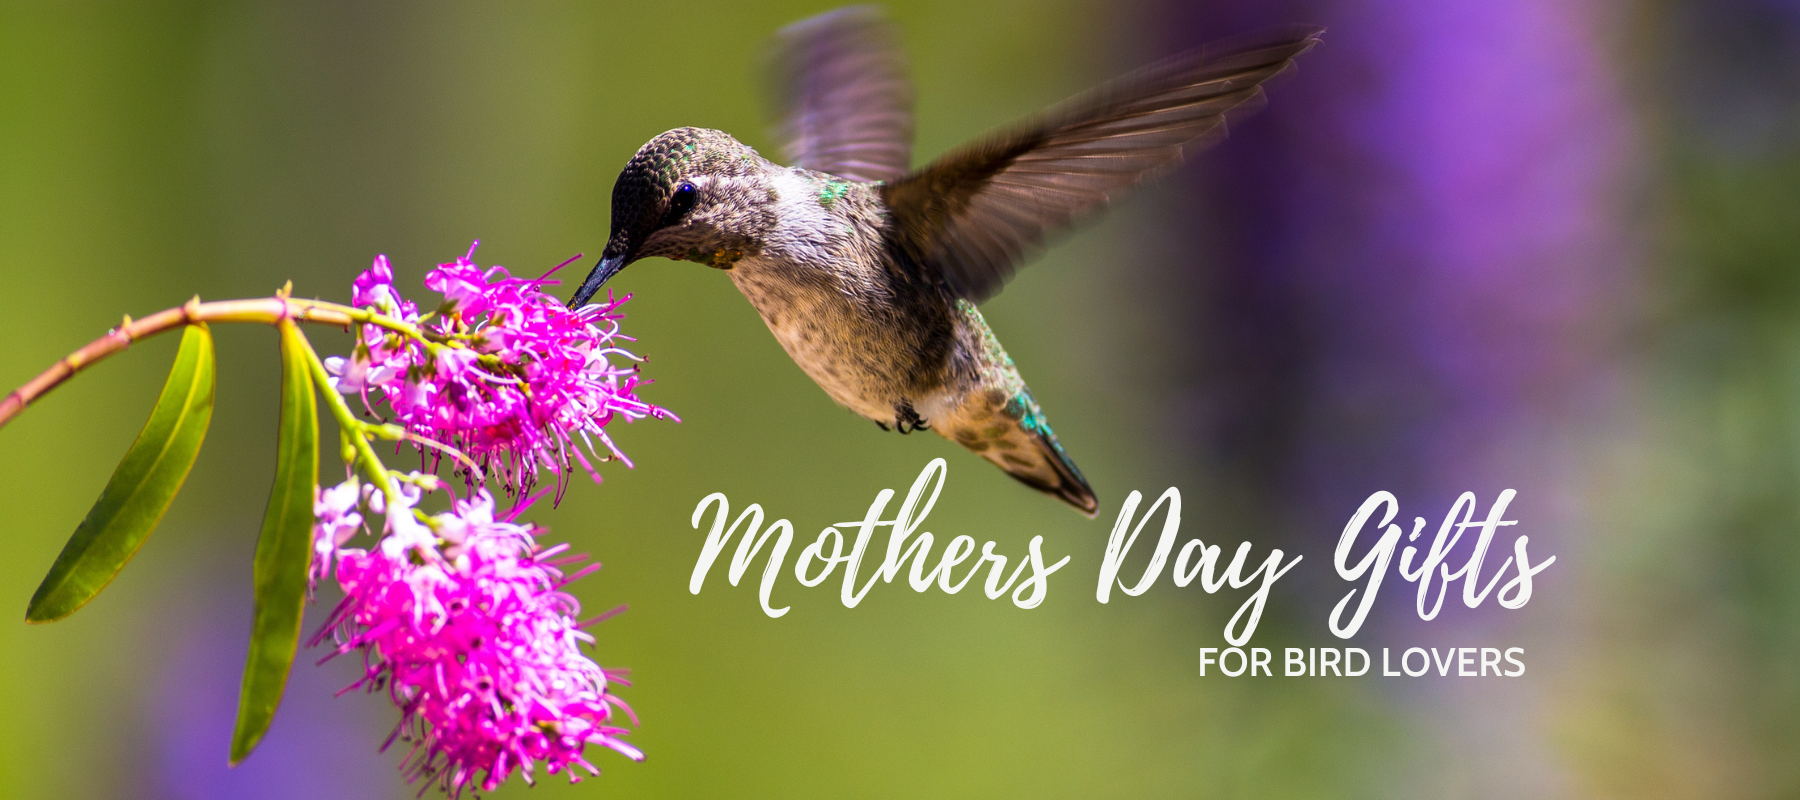 Mother’s Day Gifts for Bird Lovers 